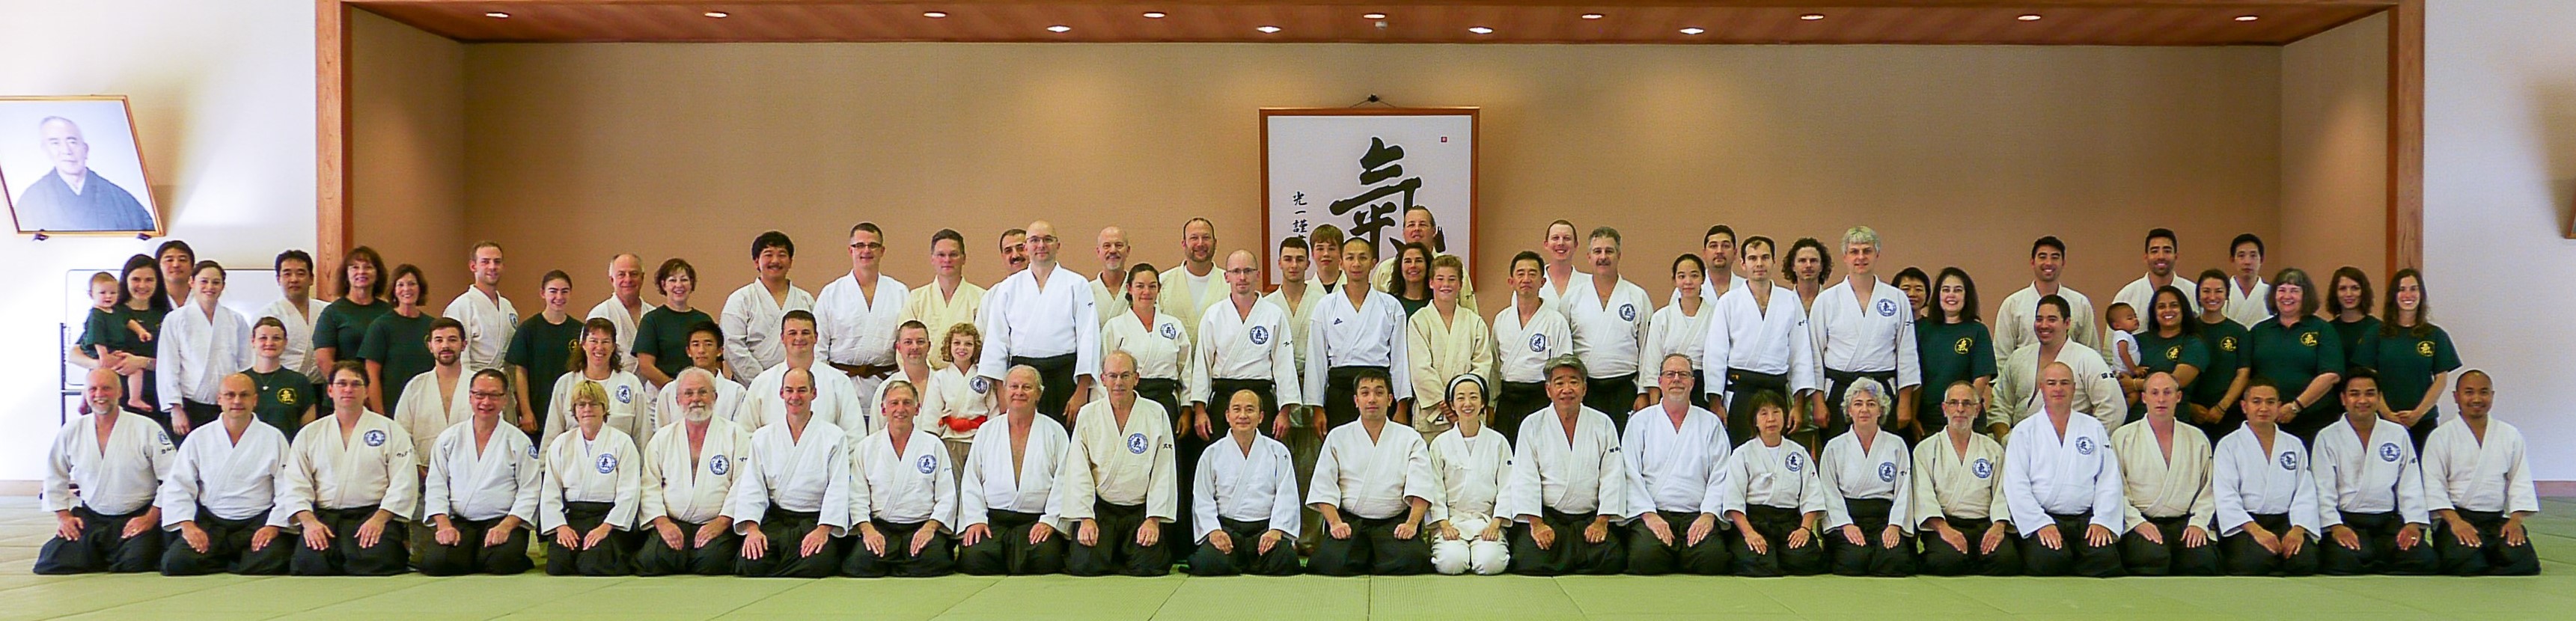 NWKF in Japan